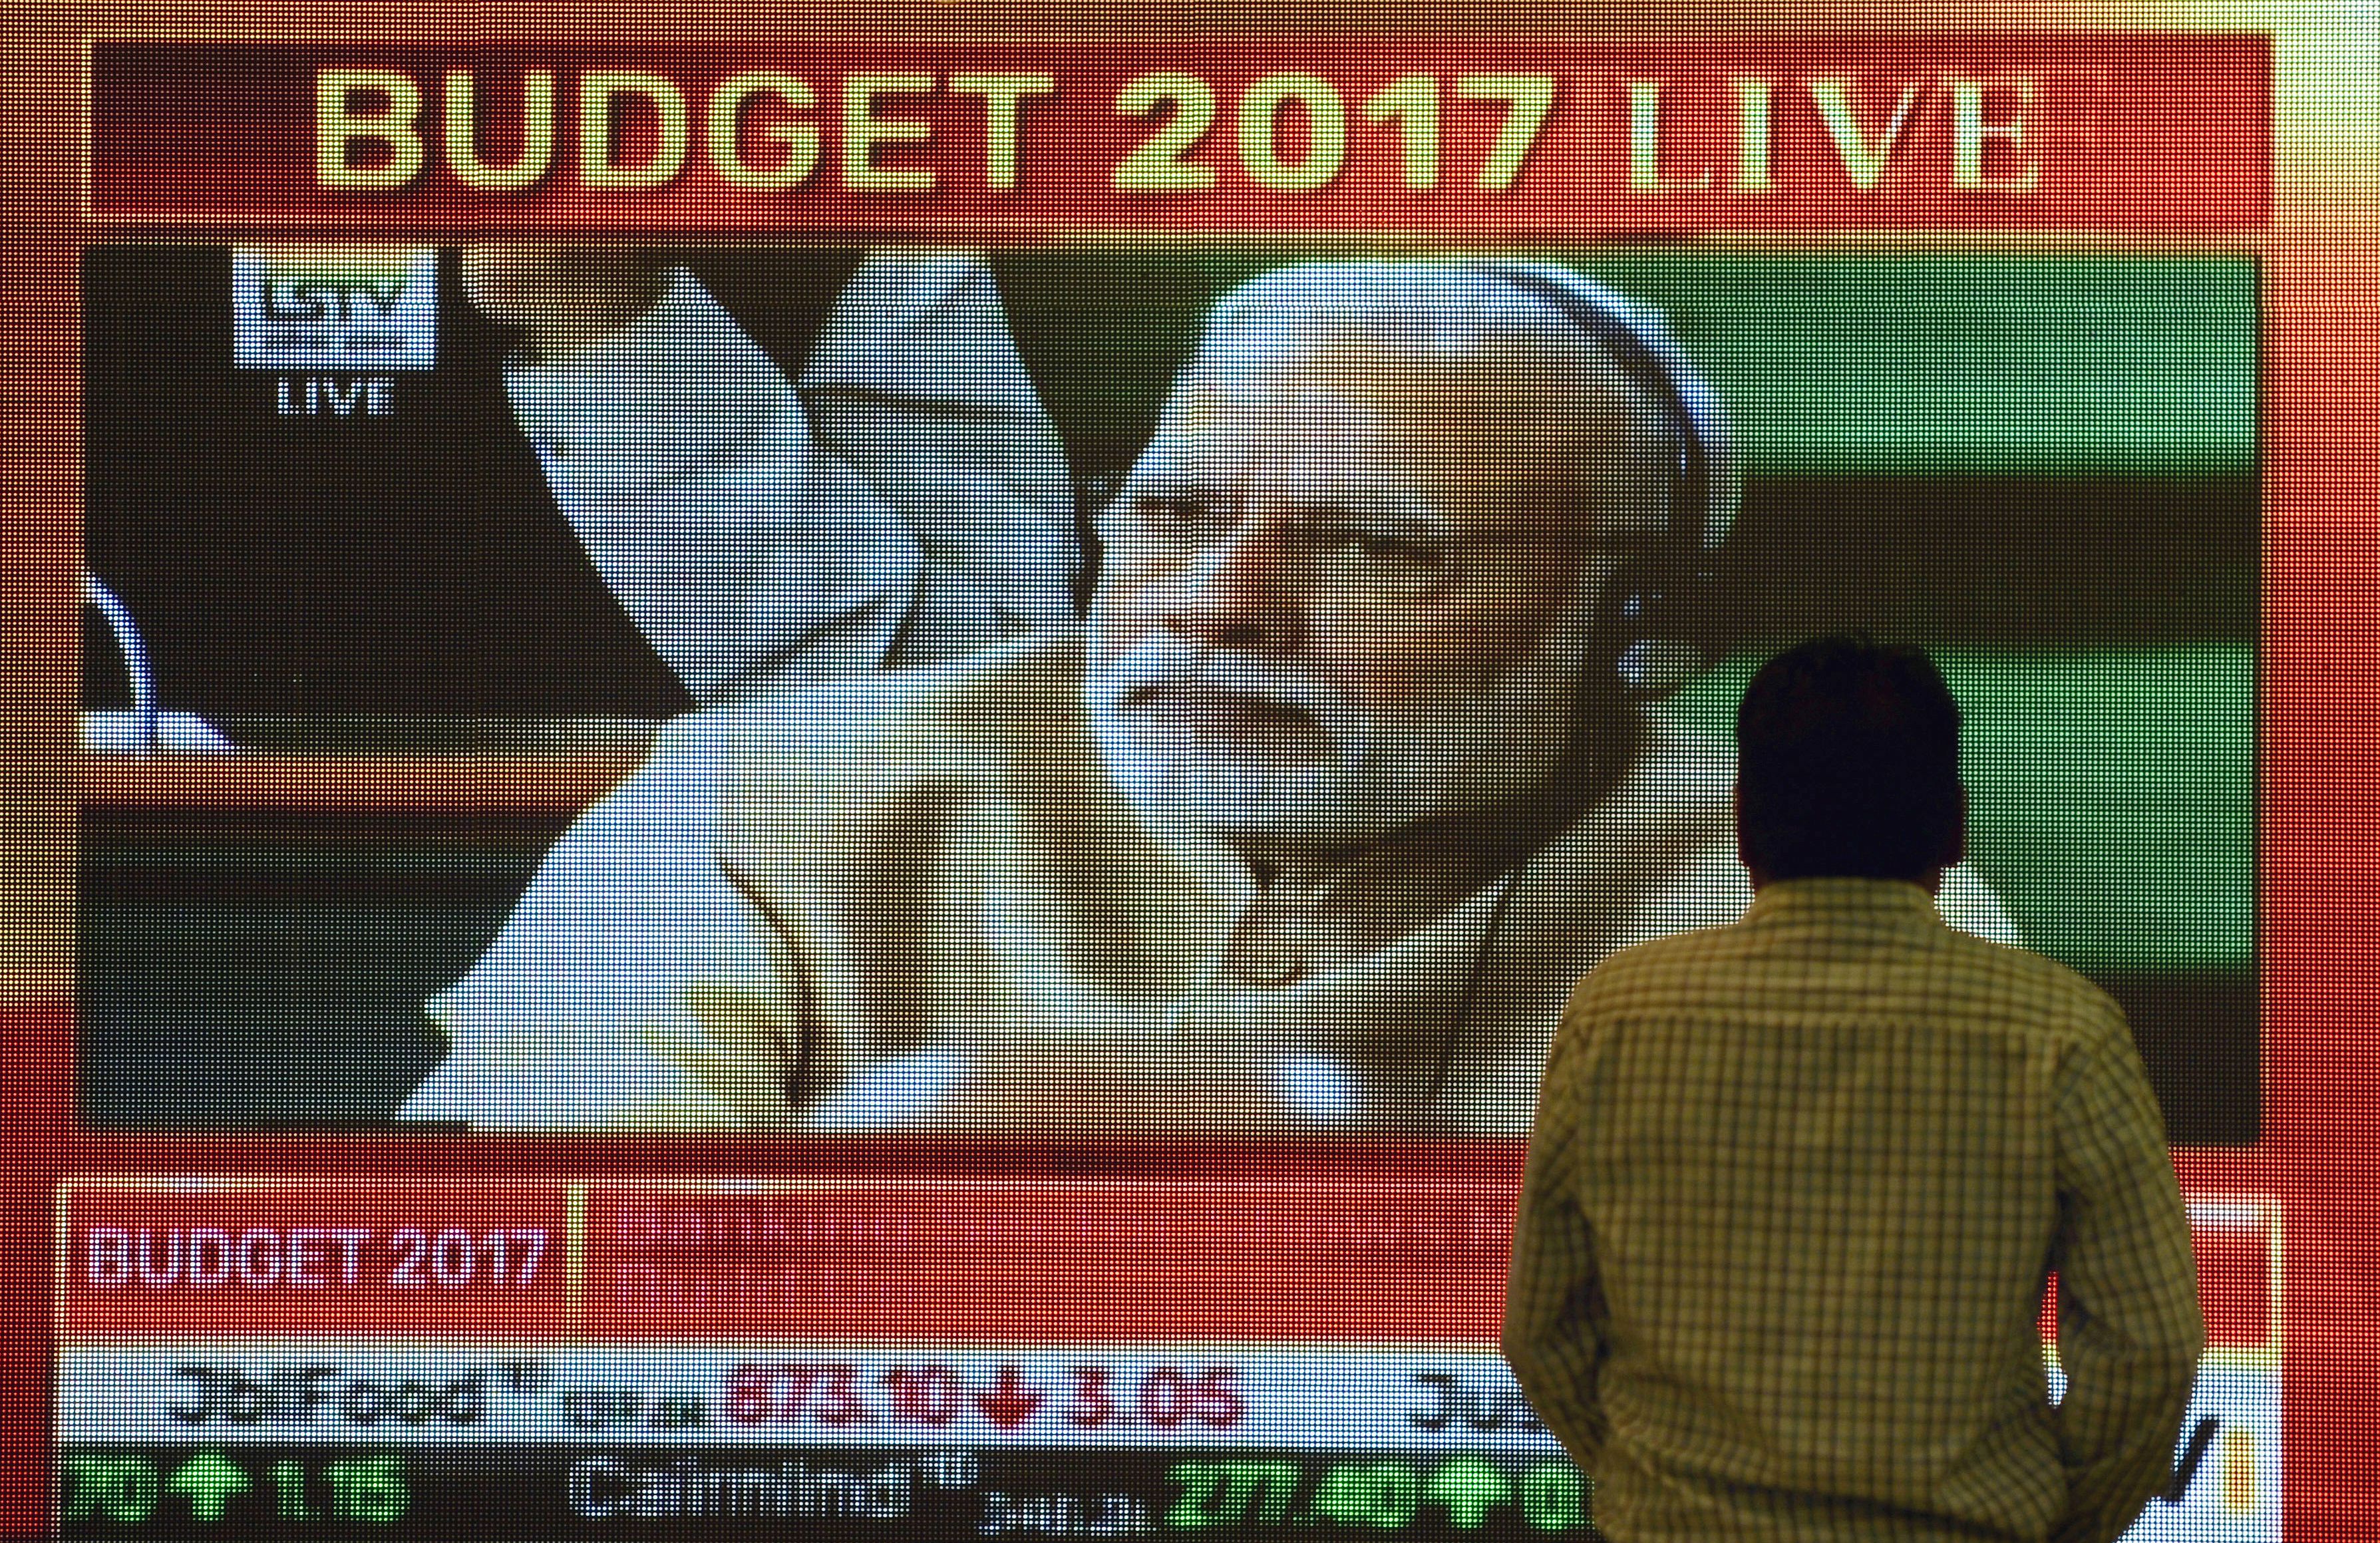 A bystander at the Bombay Stock Exchange walks past a screen showing Indian Prime Minister Narendra Modi listening to Finance Minister Arun Jaitley's delivery of the budget speech at Parliament on Feb. 1, 2017 (Punit Paranjpe—AFP/Getty Images)